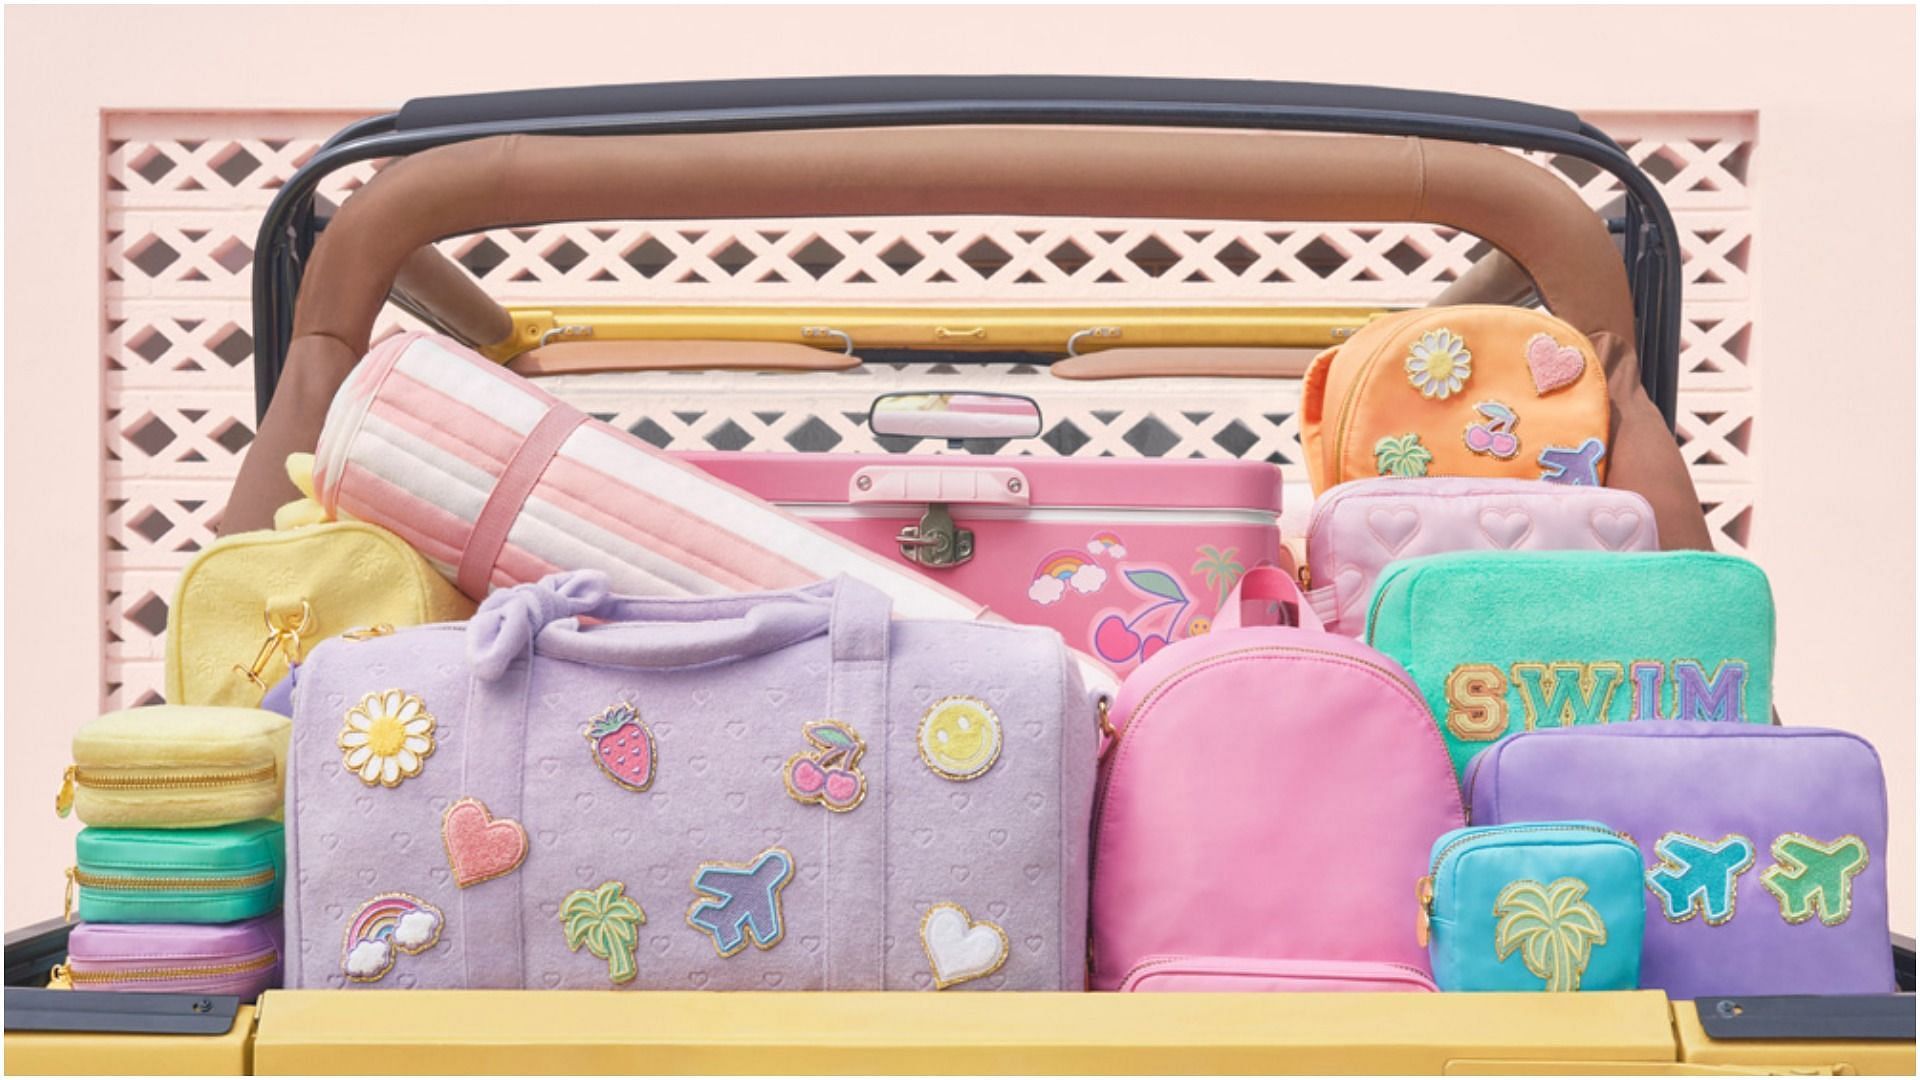 Stoney Clover Lane&#039;s travel accessories allow customization to celebrate individuality (Image via Target)